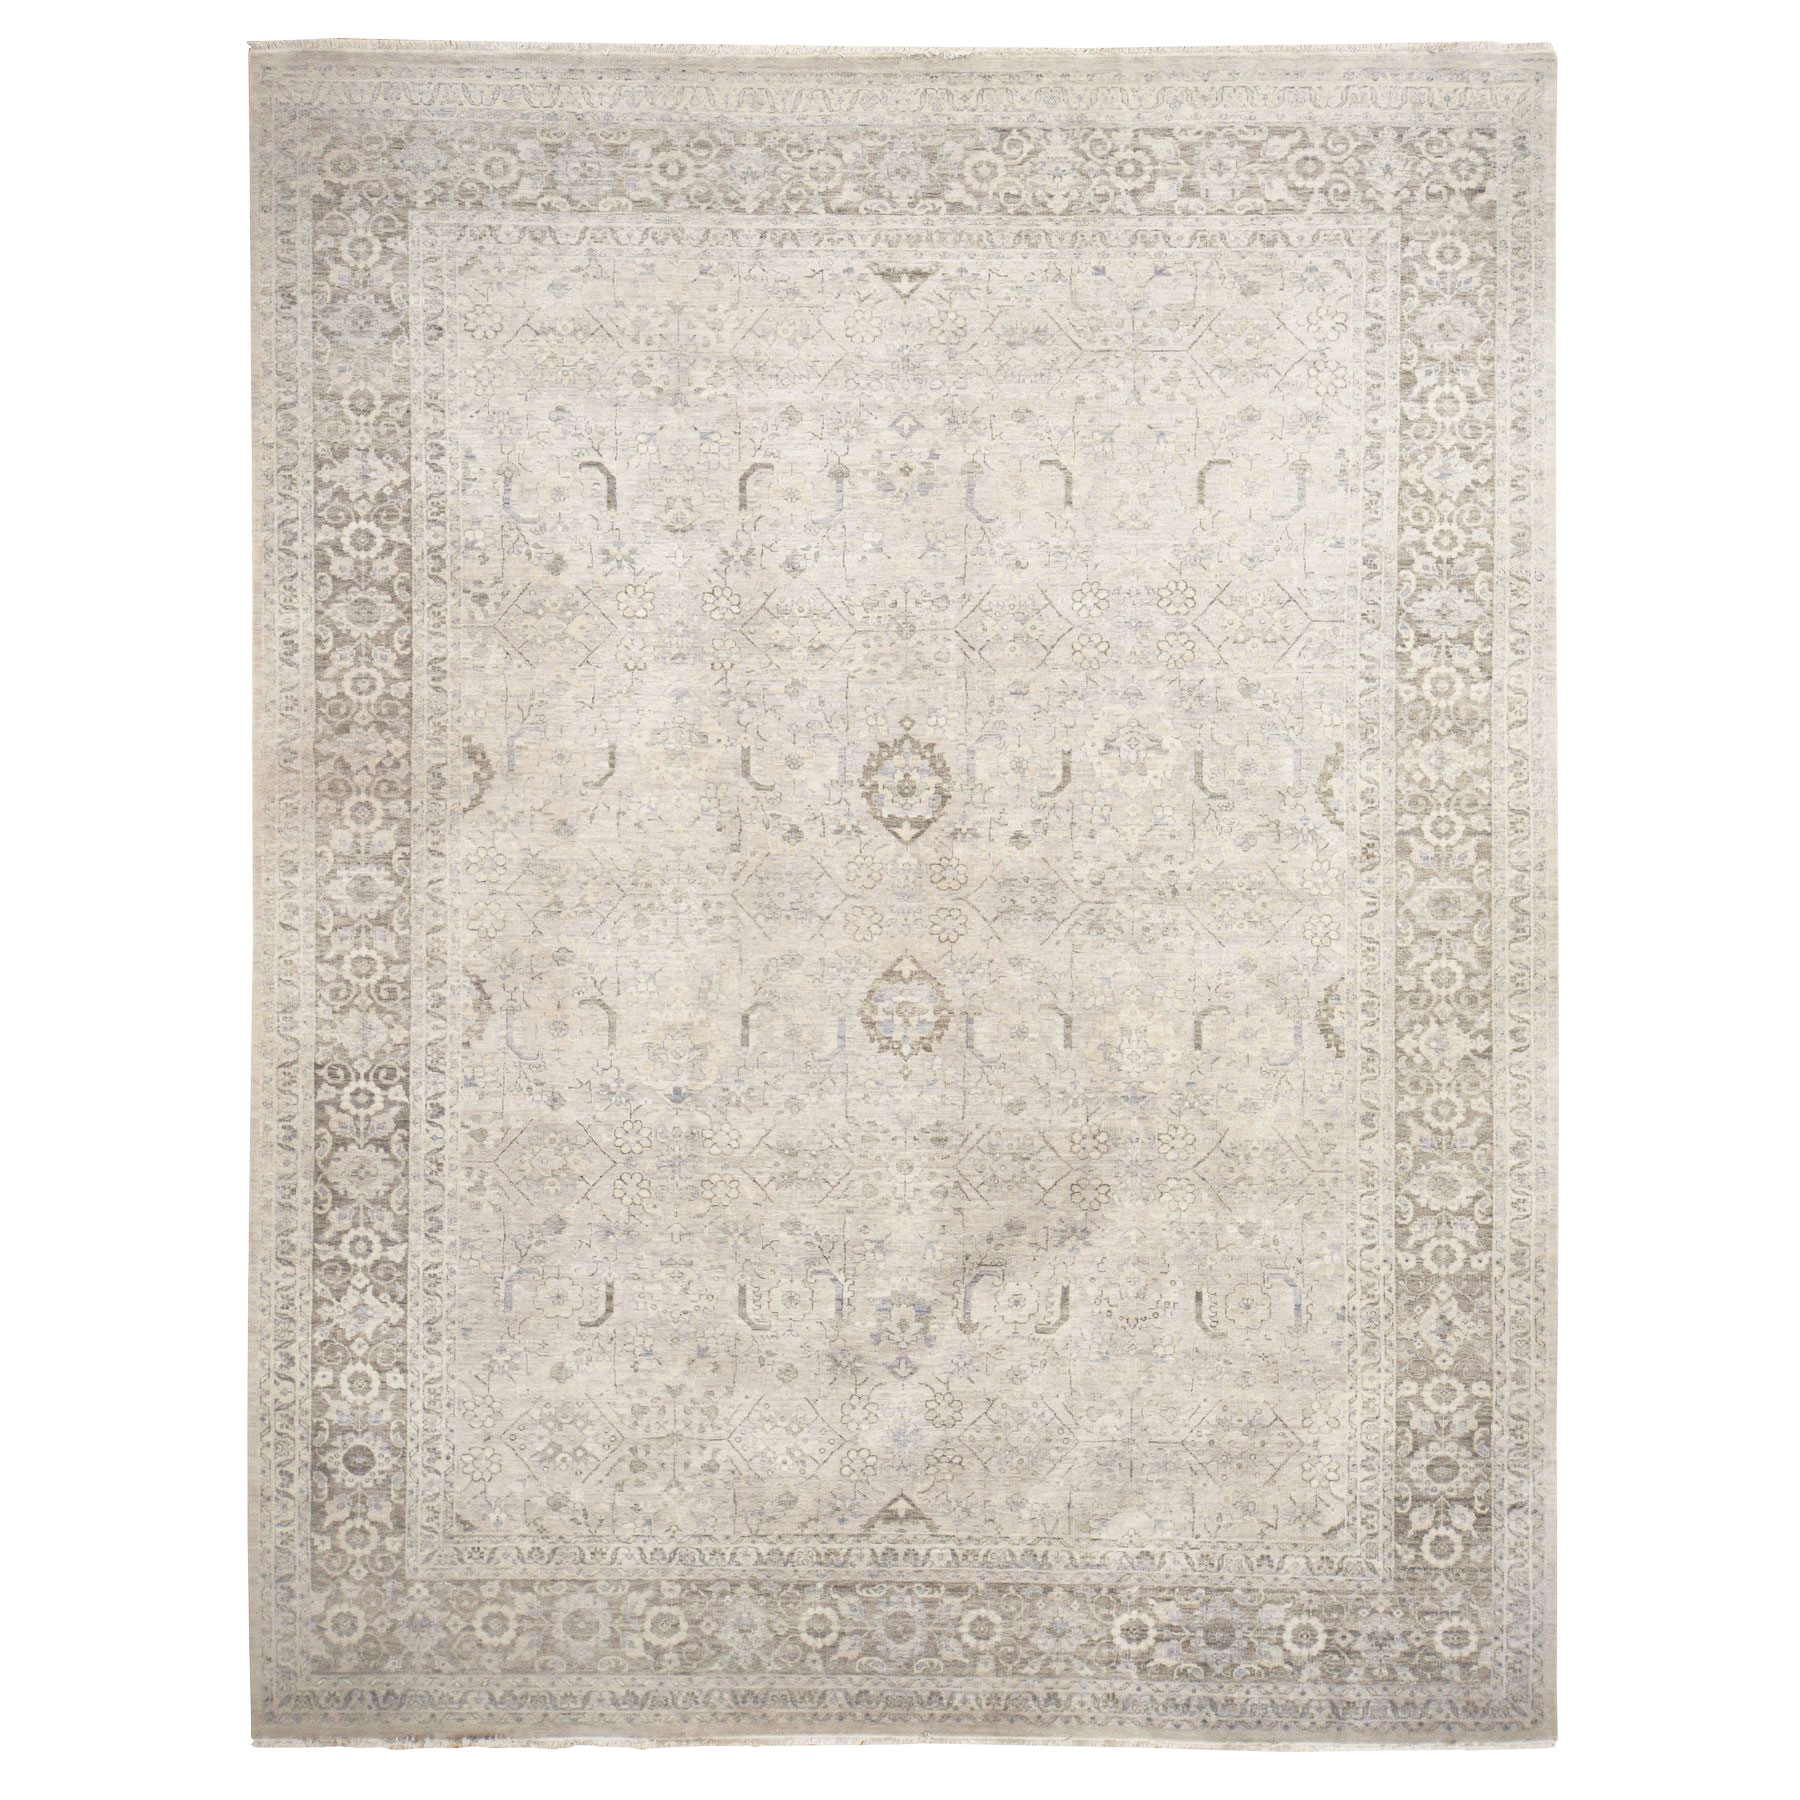 Chateau Gray, Hand Knotted, 100% Wool, Distressed, Persian Sultanabad Influence, Broken and Erased, Pile Cropped Low, Oriental Rug